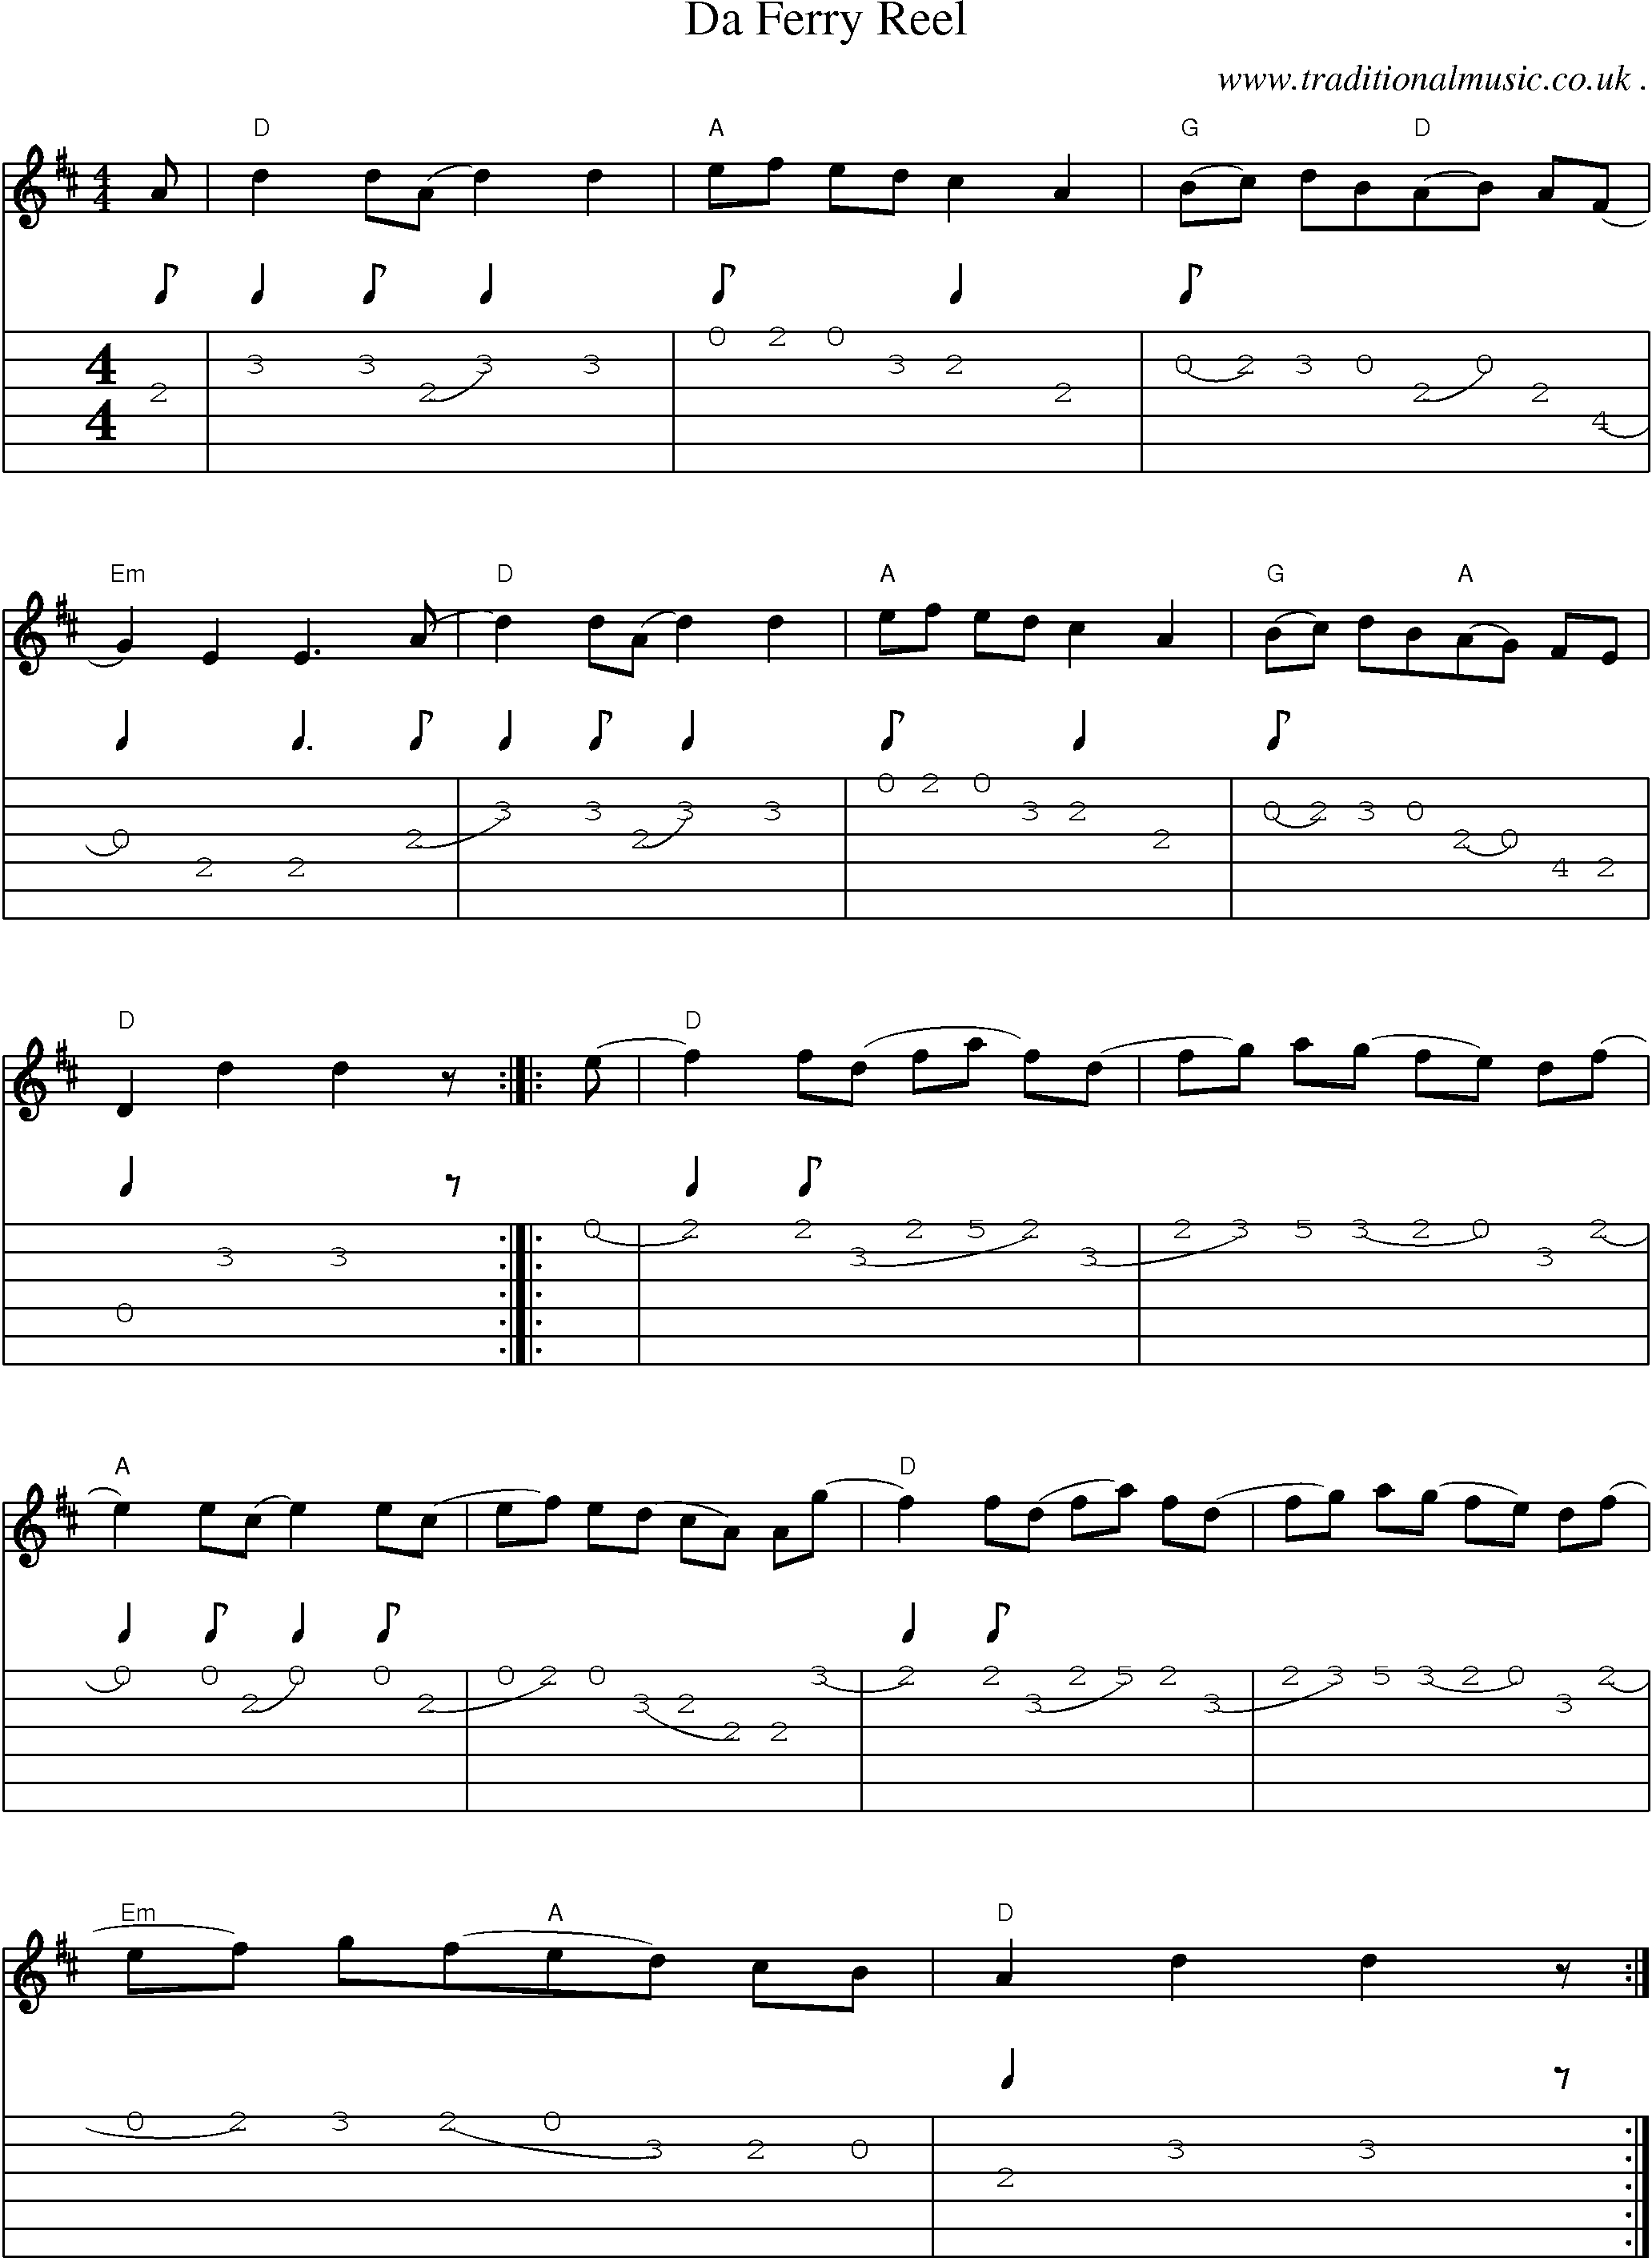 Sheet-Music and Guitar Tabs for Da Ferry Reel